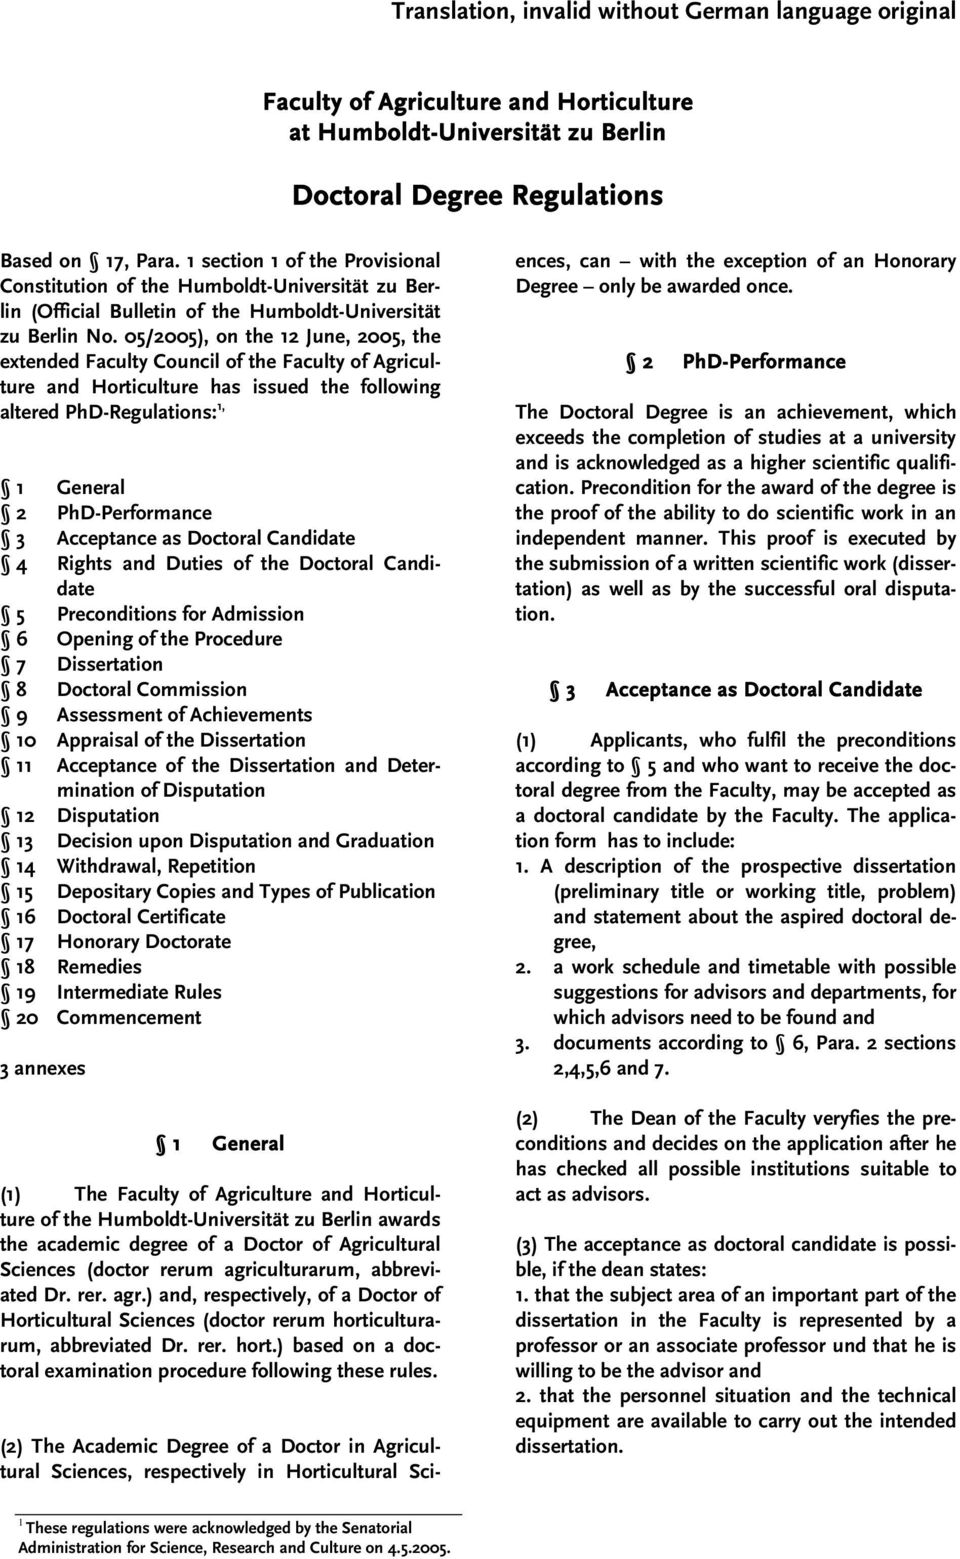 05/2005), on the 12 June, 2005, the extended Faculty Council of the Faculty of Agriculture and Horticulture has issued the following altered PhD-Regulations: 1, 1 General 2 PhD-Performance 3